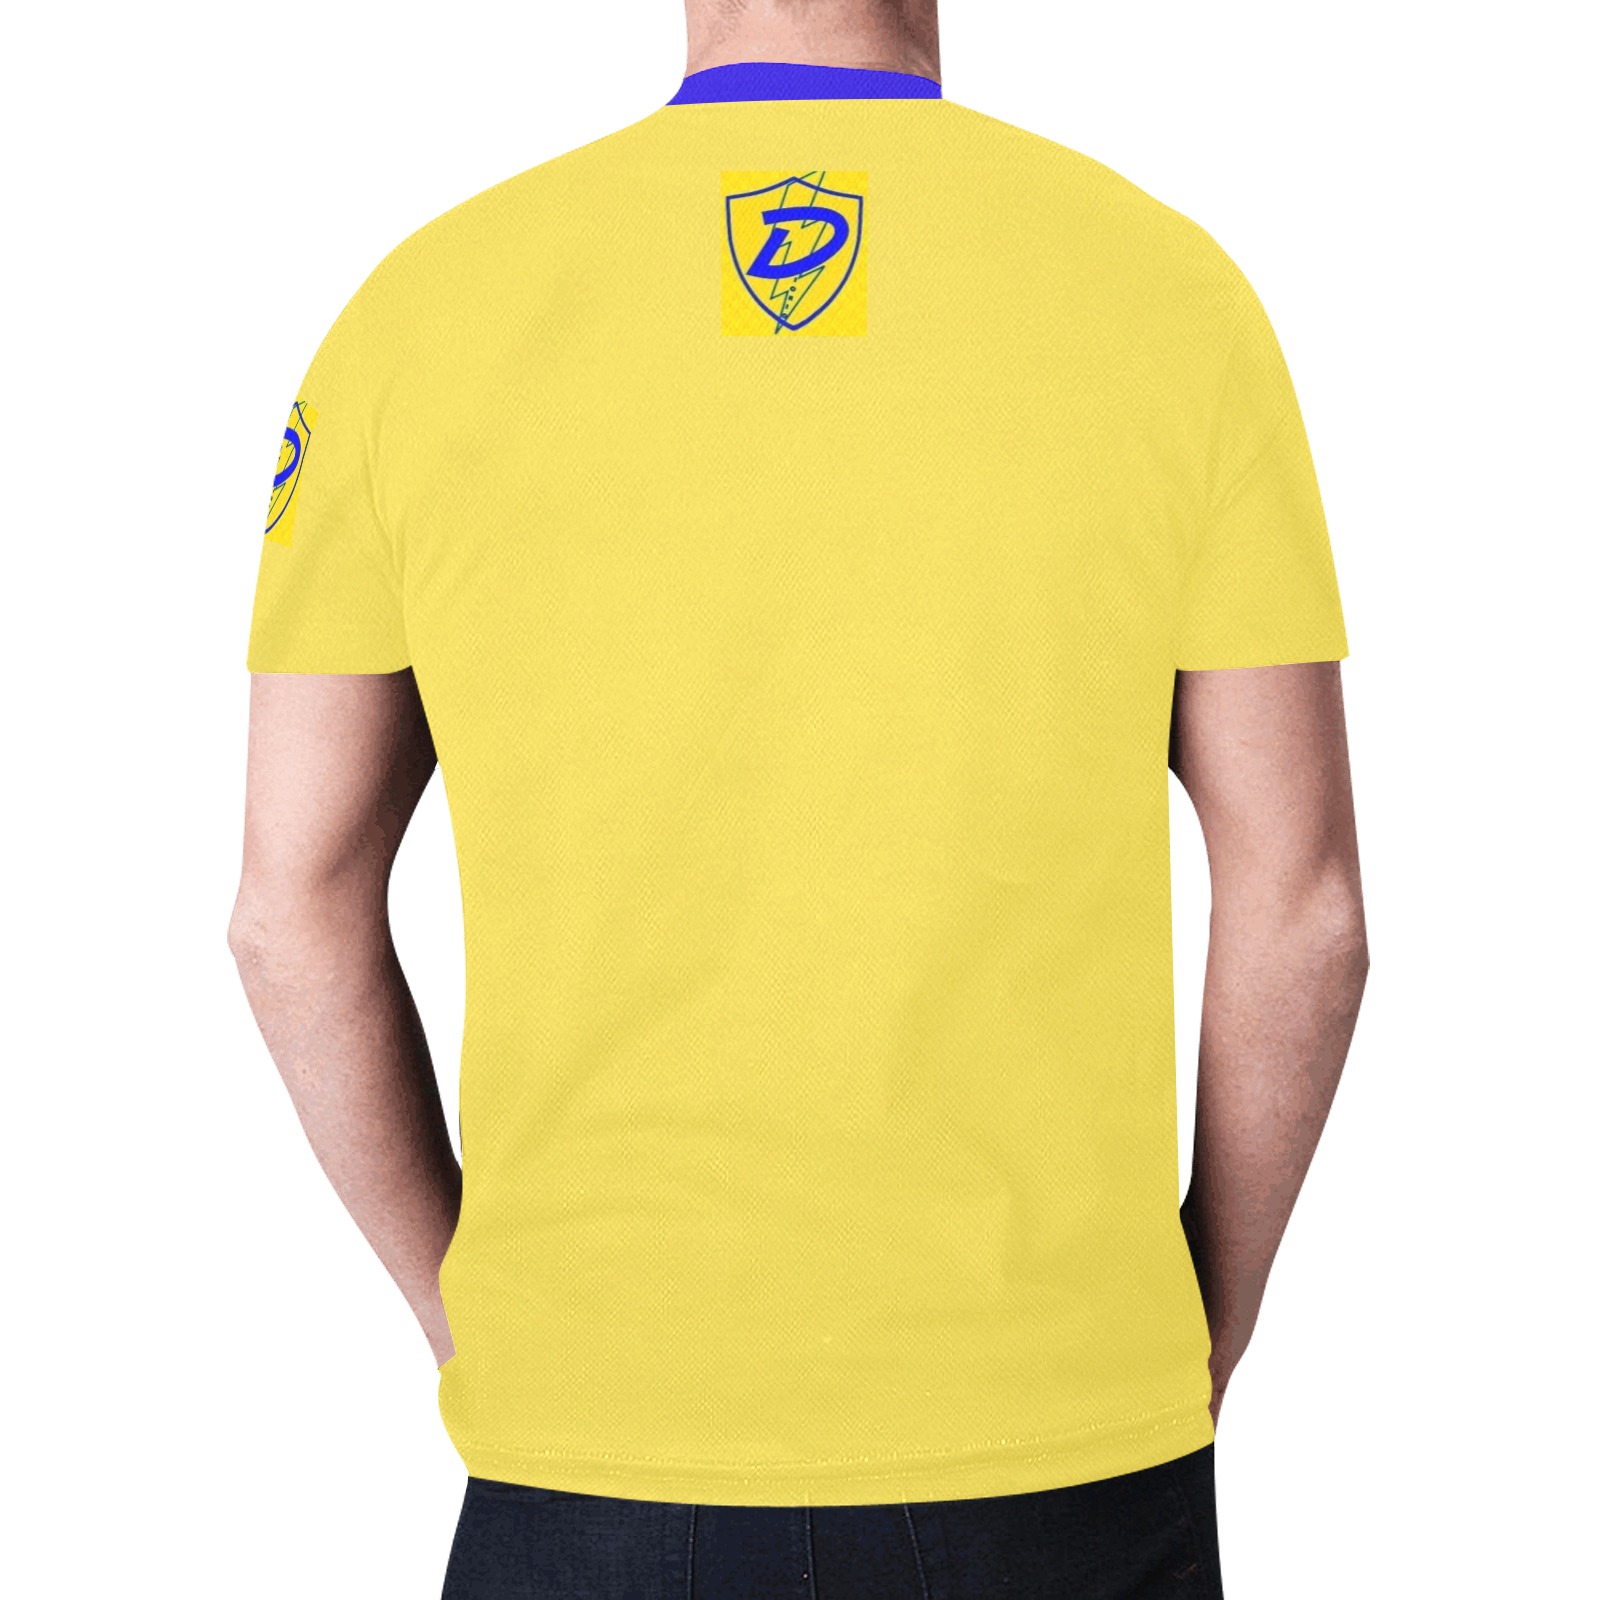 Dionio Clothing - T-shirt ( Small Yellow Shield Logo) New All Over Print T-shirt for Men (Model T45)